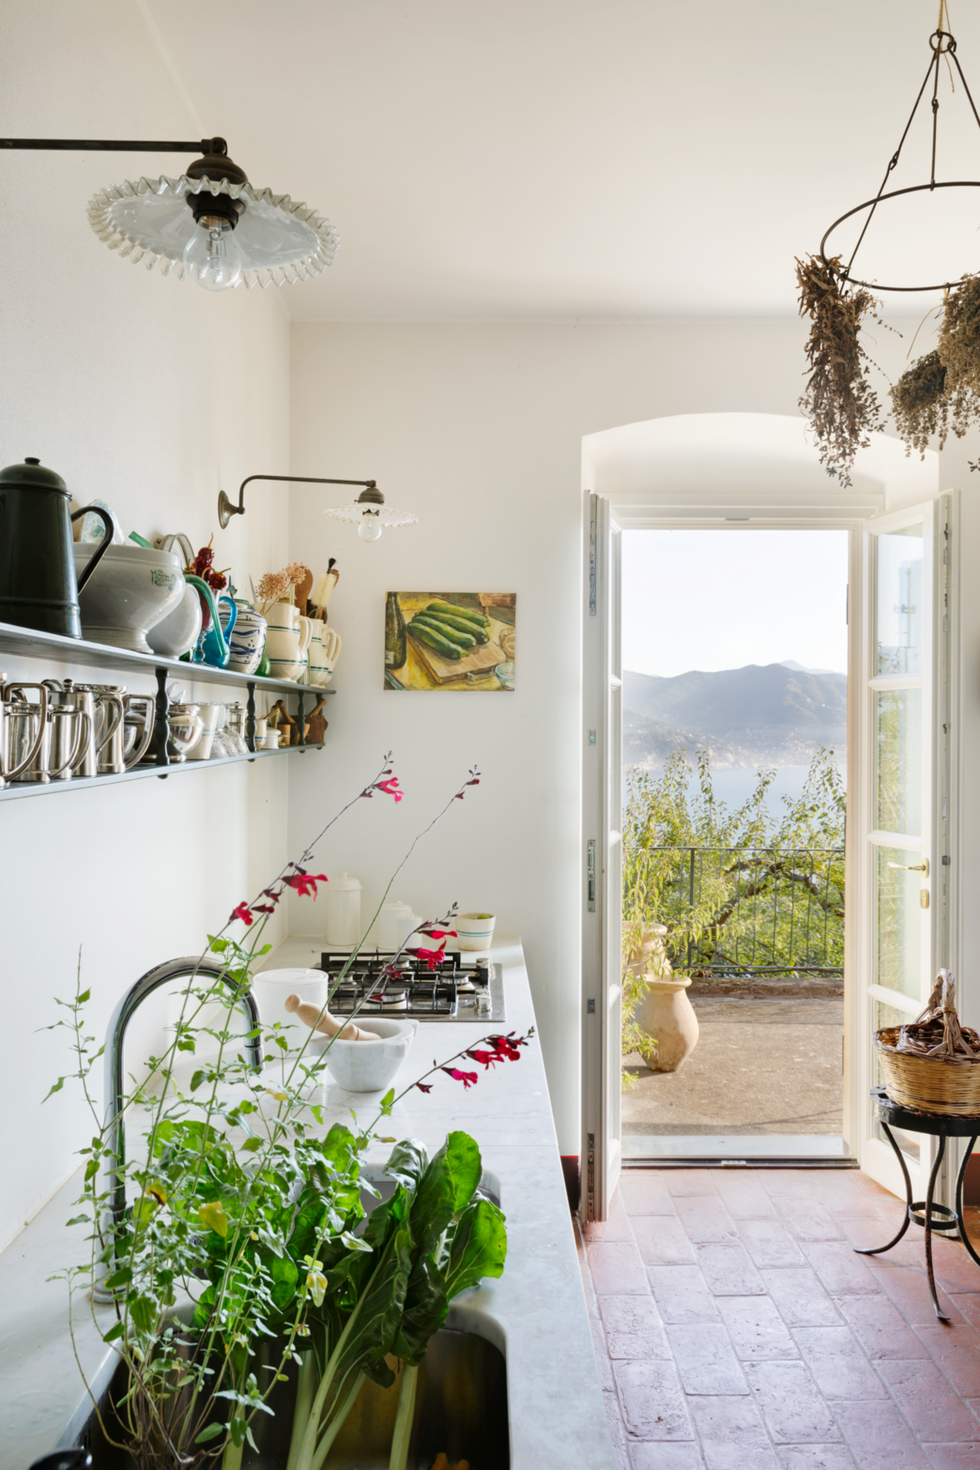 https://hips.hearstapps.com/hmg-prod/images/bay-kitchen-italy-veranda-1581720522.png?crop=1xw:1xh;center,top&resize=980:*